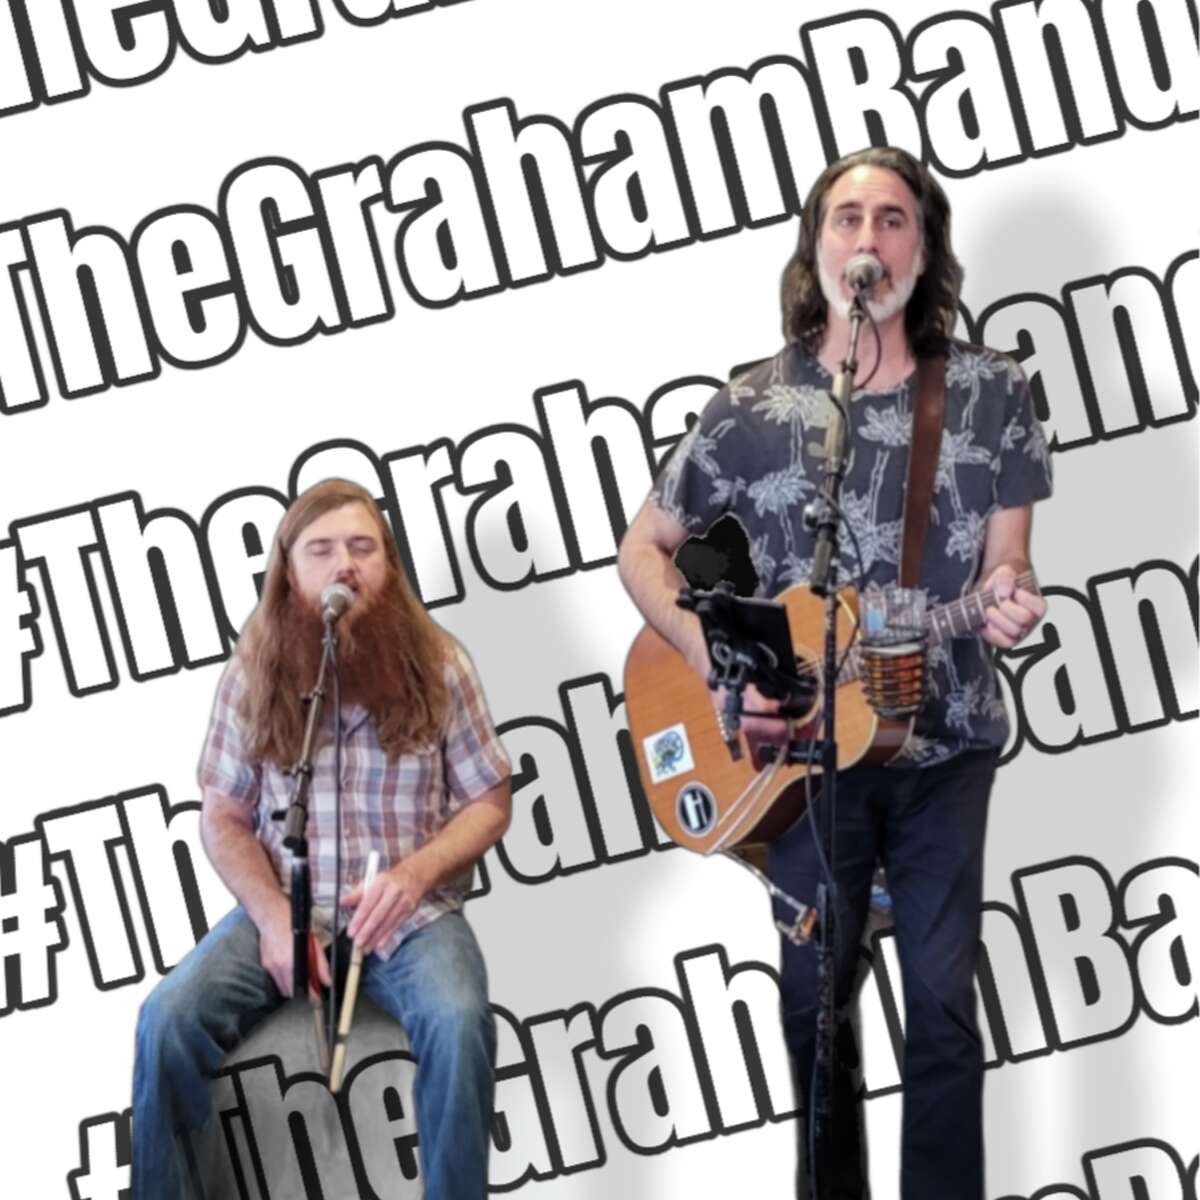 The Graham Band will play at Big Daddy's Edwardsville, 132 N. Main St., from 6-9 p.m. Tuesday, March 8.